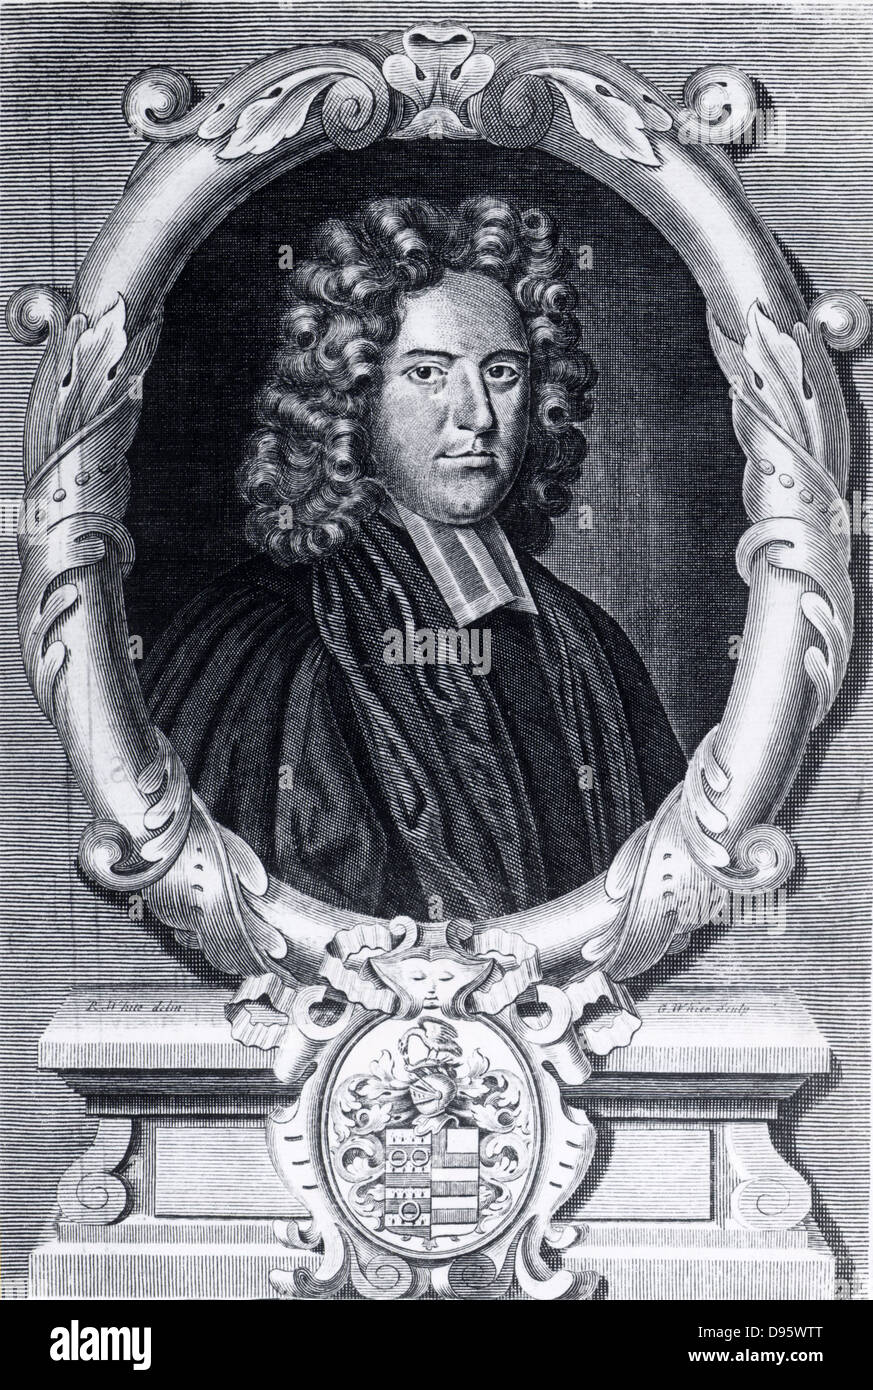 John Harris (1667-1719), English mathematician, at the age of 40. Harrison was Secretary of the Royal Society (1709-1710).  Engraving from the frontispiece of the fifth edition of his 'Lexicon Technicum' (London, 1736), first edition 1704. Stock Photo